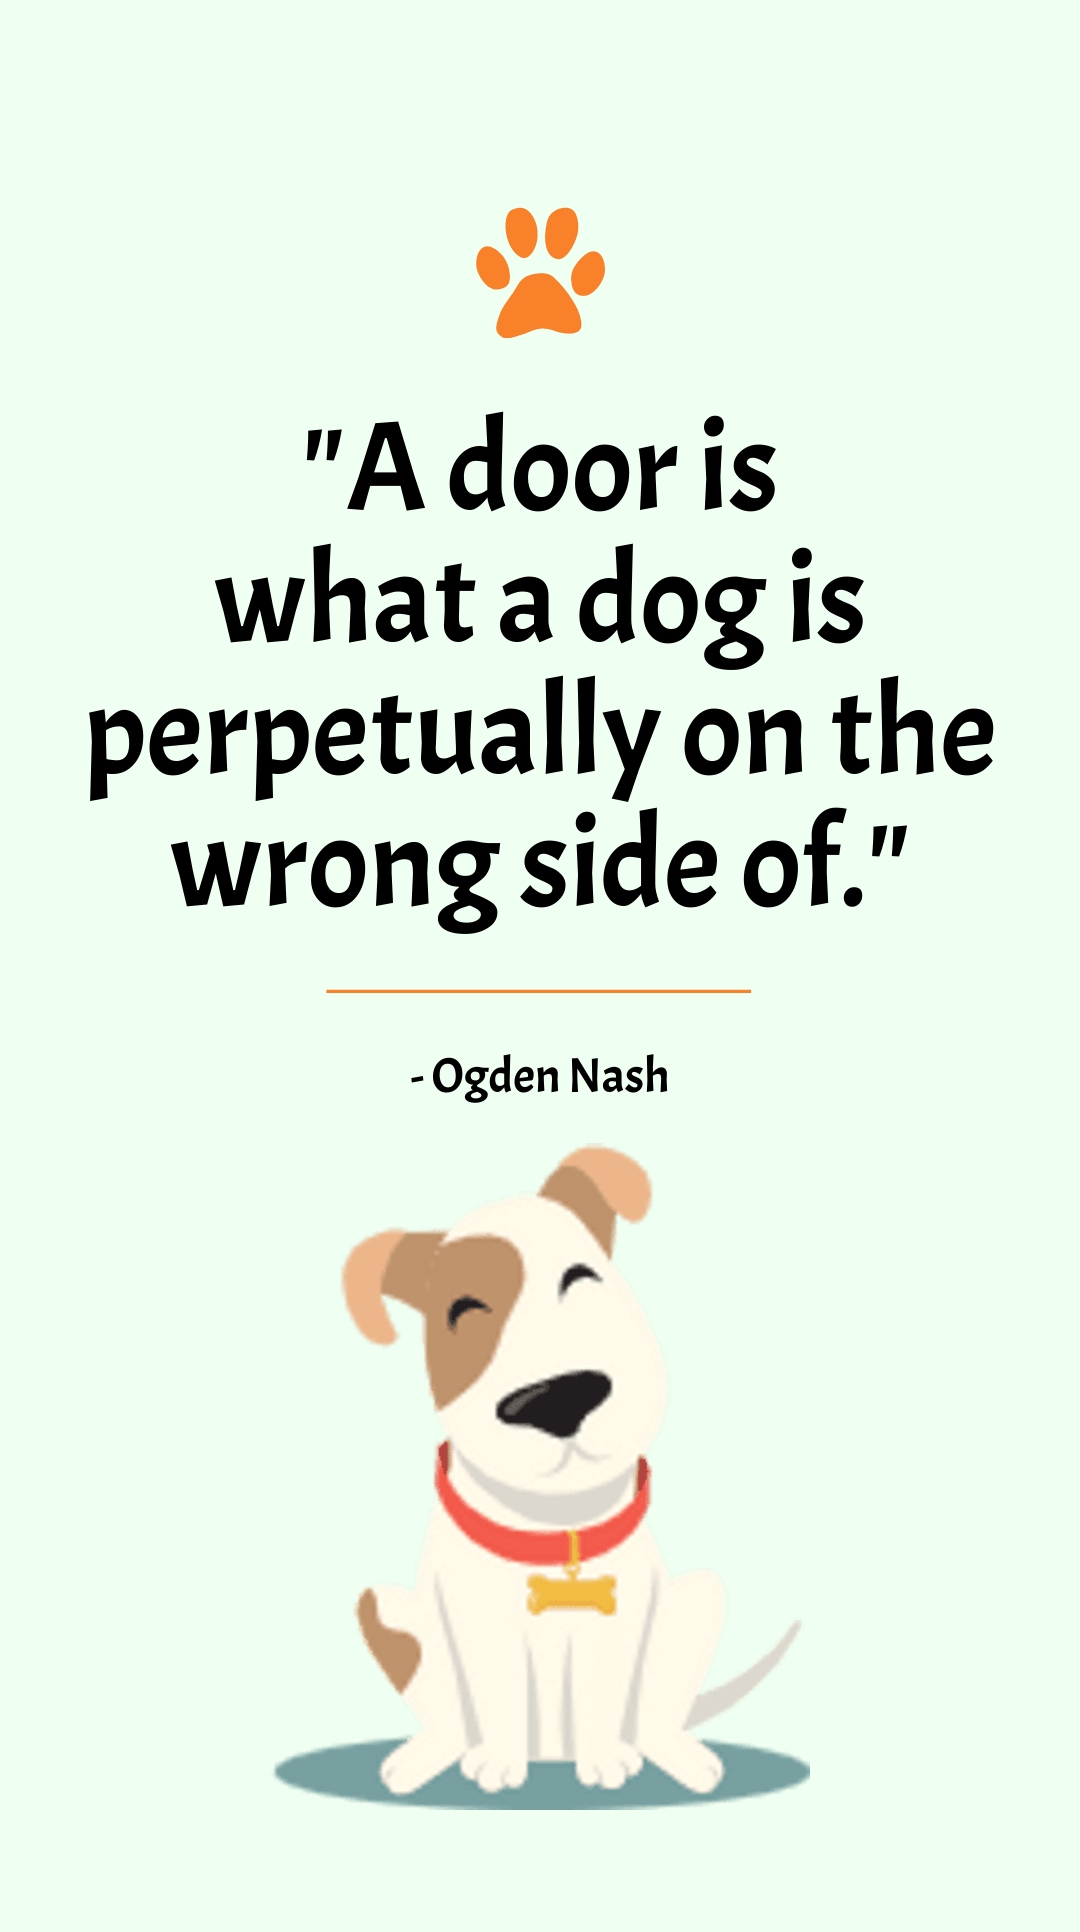 Free Ogden Nash - A door is what a dog is perpetually on the wrong side of. in JPG